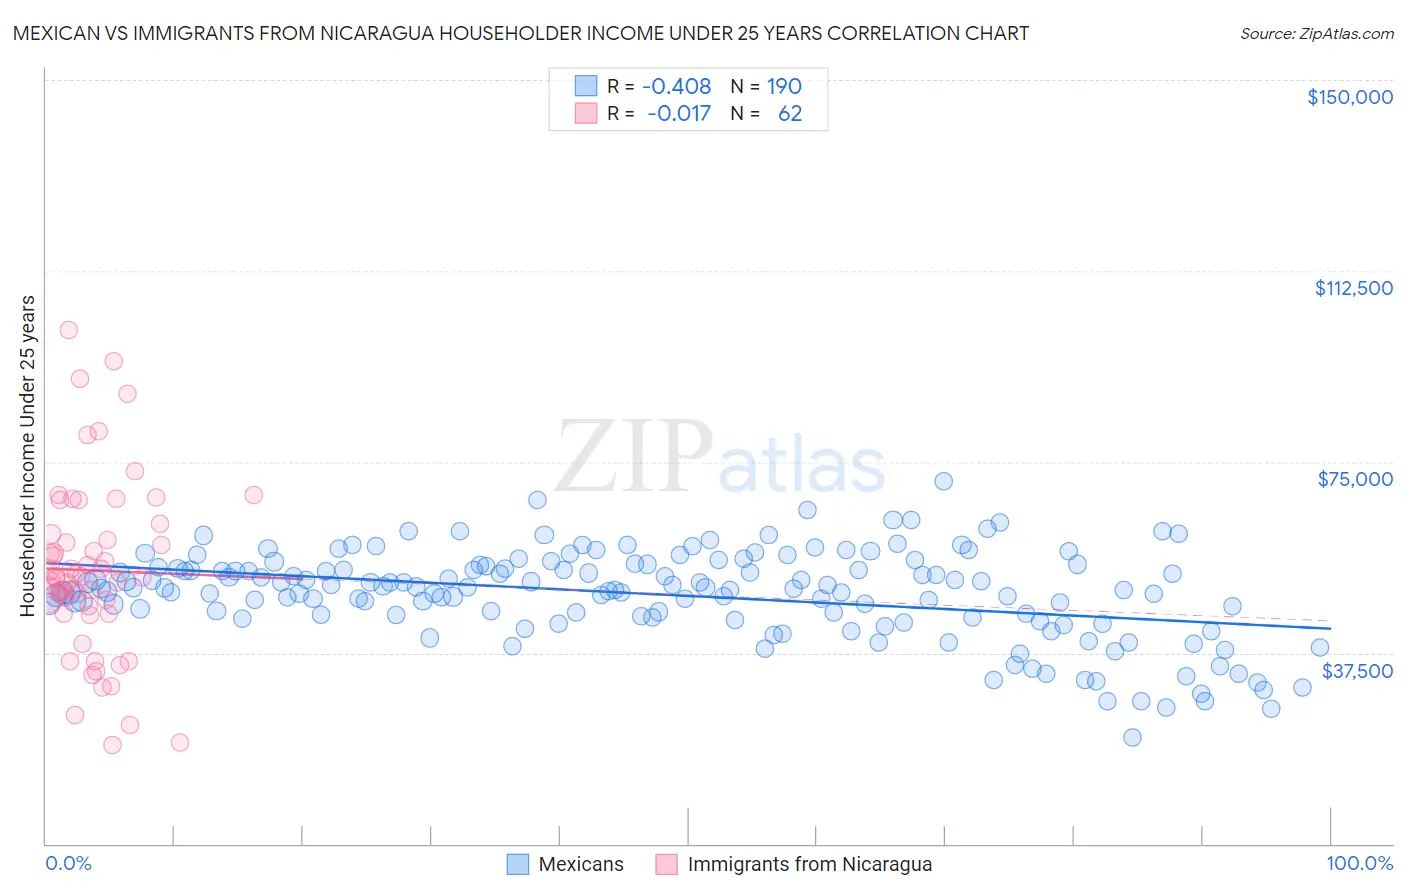 Mexican vs Immigrants from Nicaragua Householder Income Under 25 years